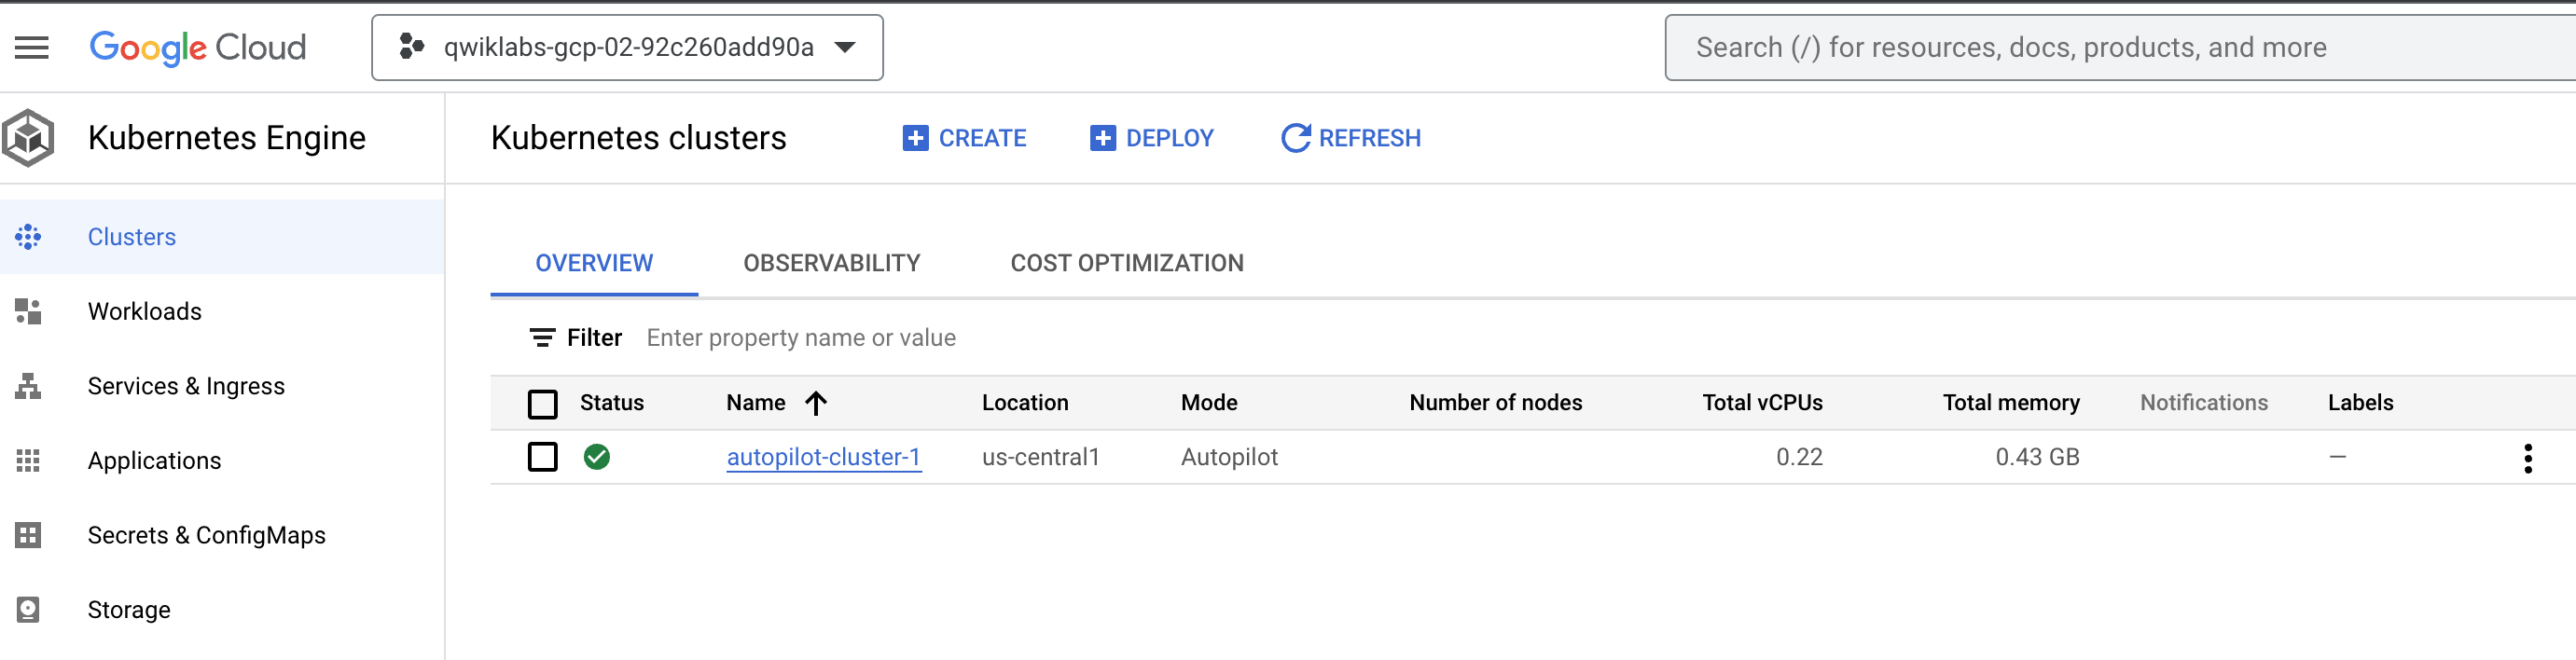 Kubernetes Clusters page displaying details such as location, cluster size, total cores, and total memory for autopilot-cluster-1